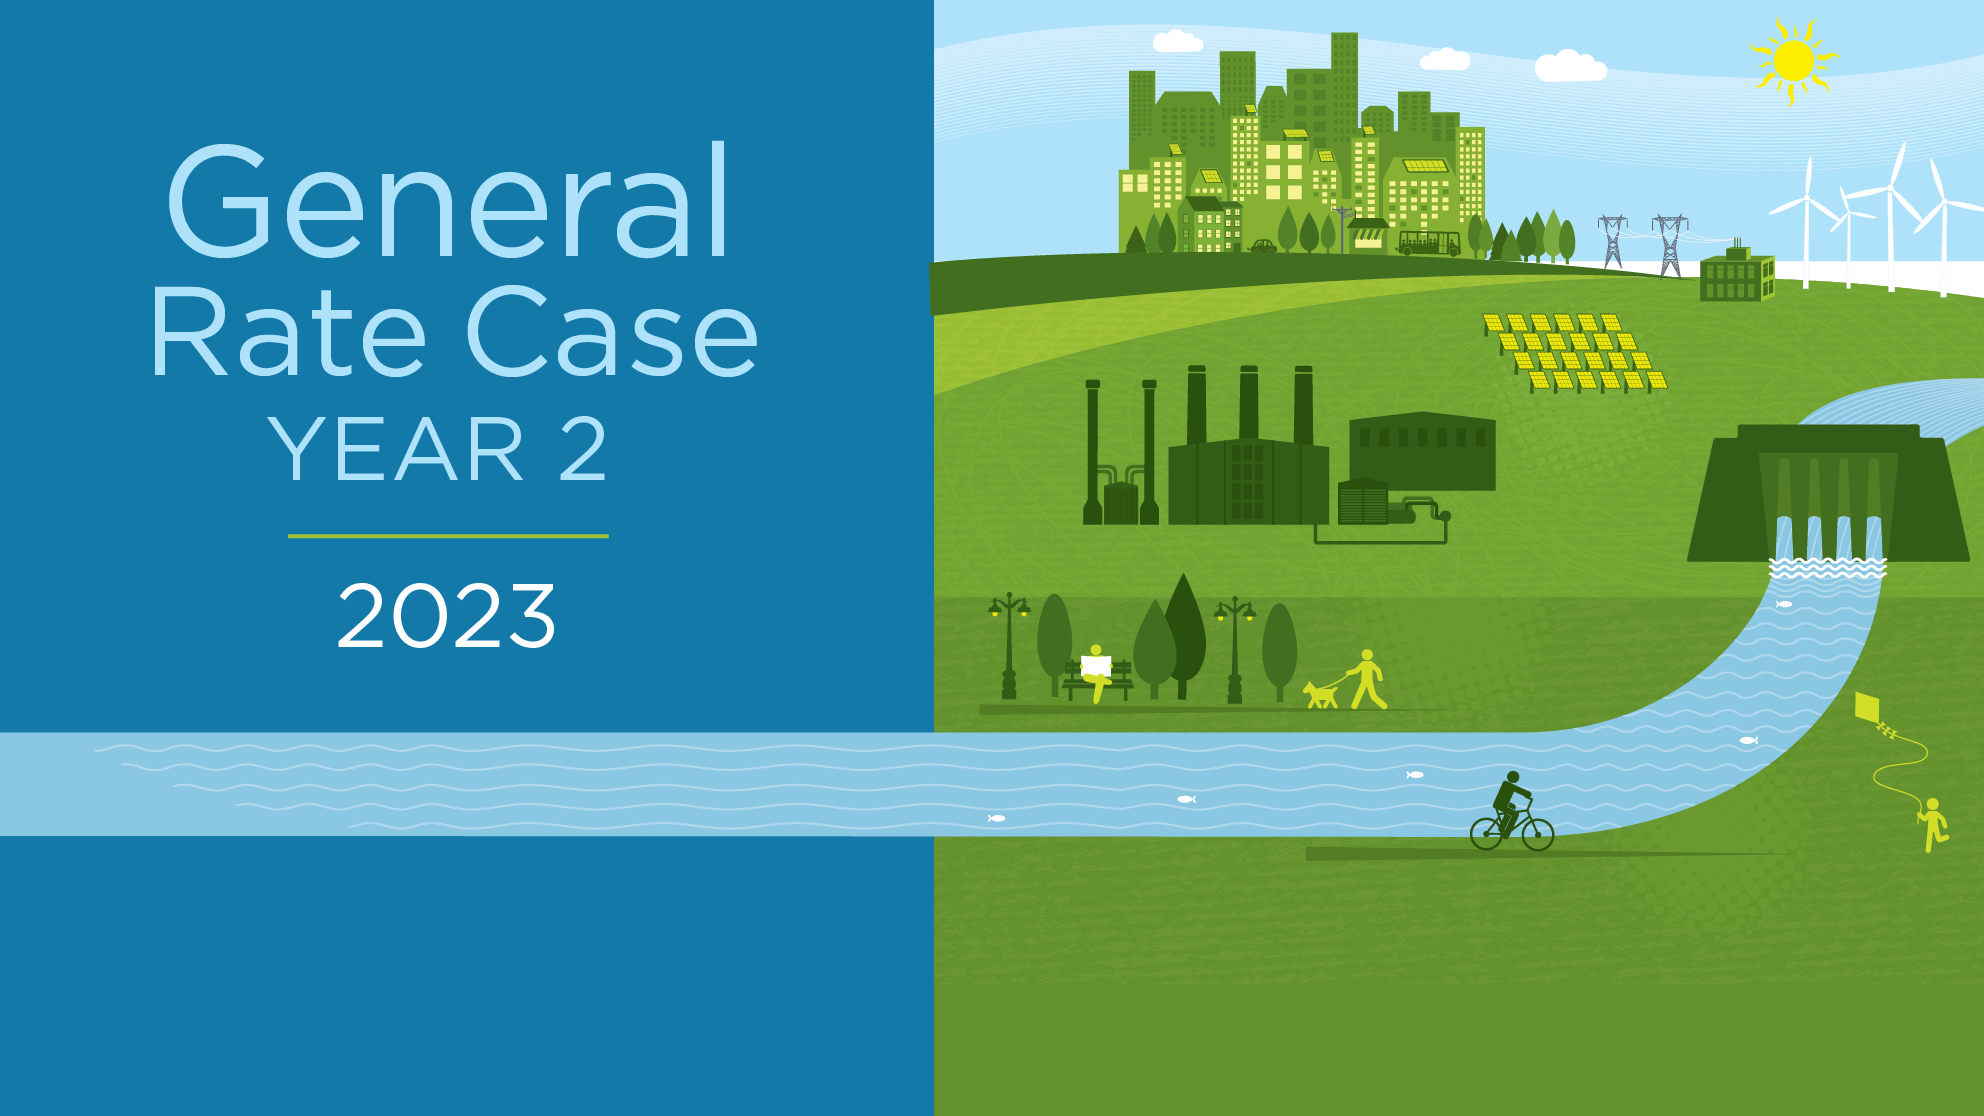 general rate case year 2 2023 graphic